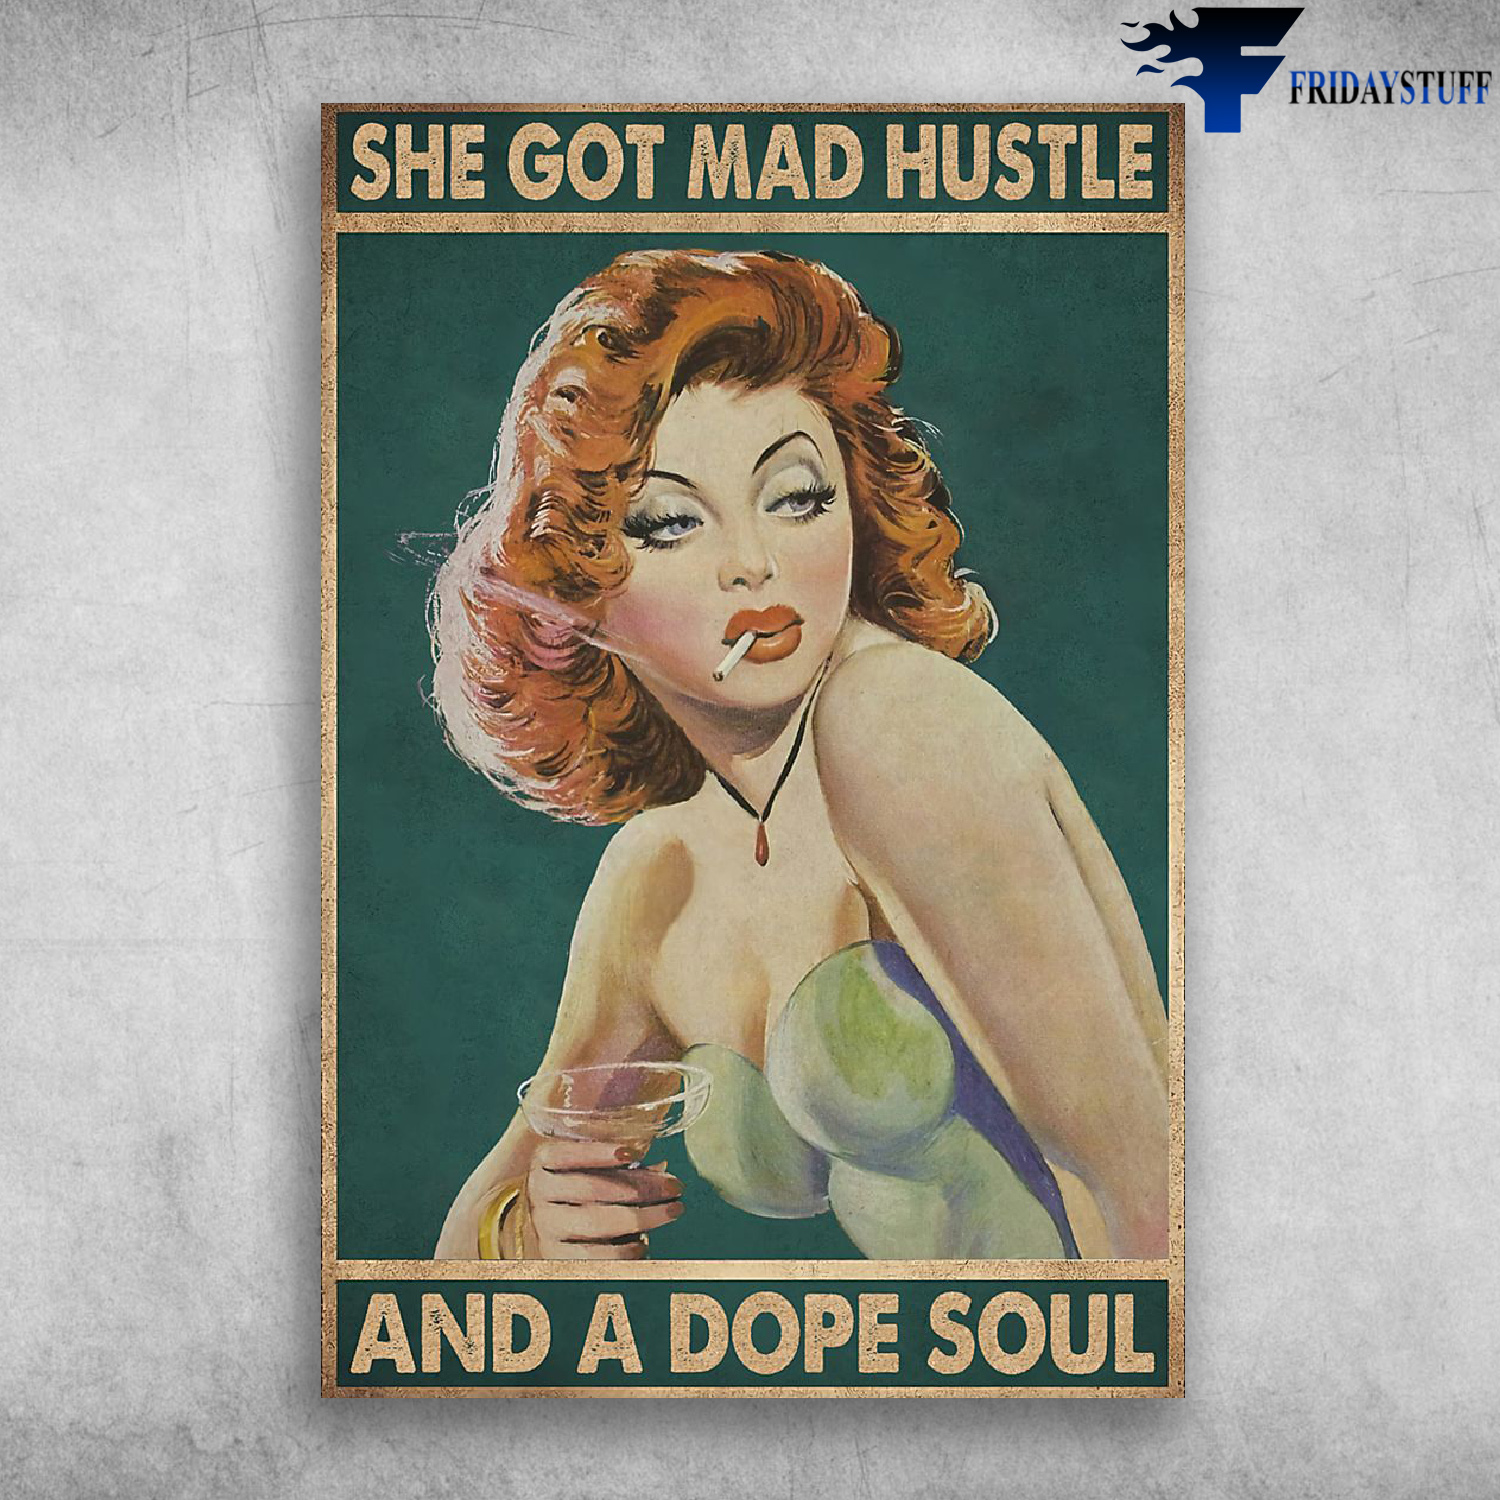 She Got Mad Hustle And A Dope Soul - Girl Is Smoking And Drink Cocktails